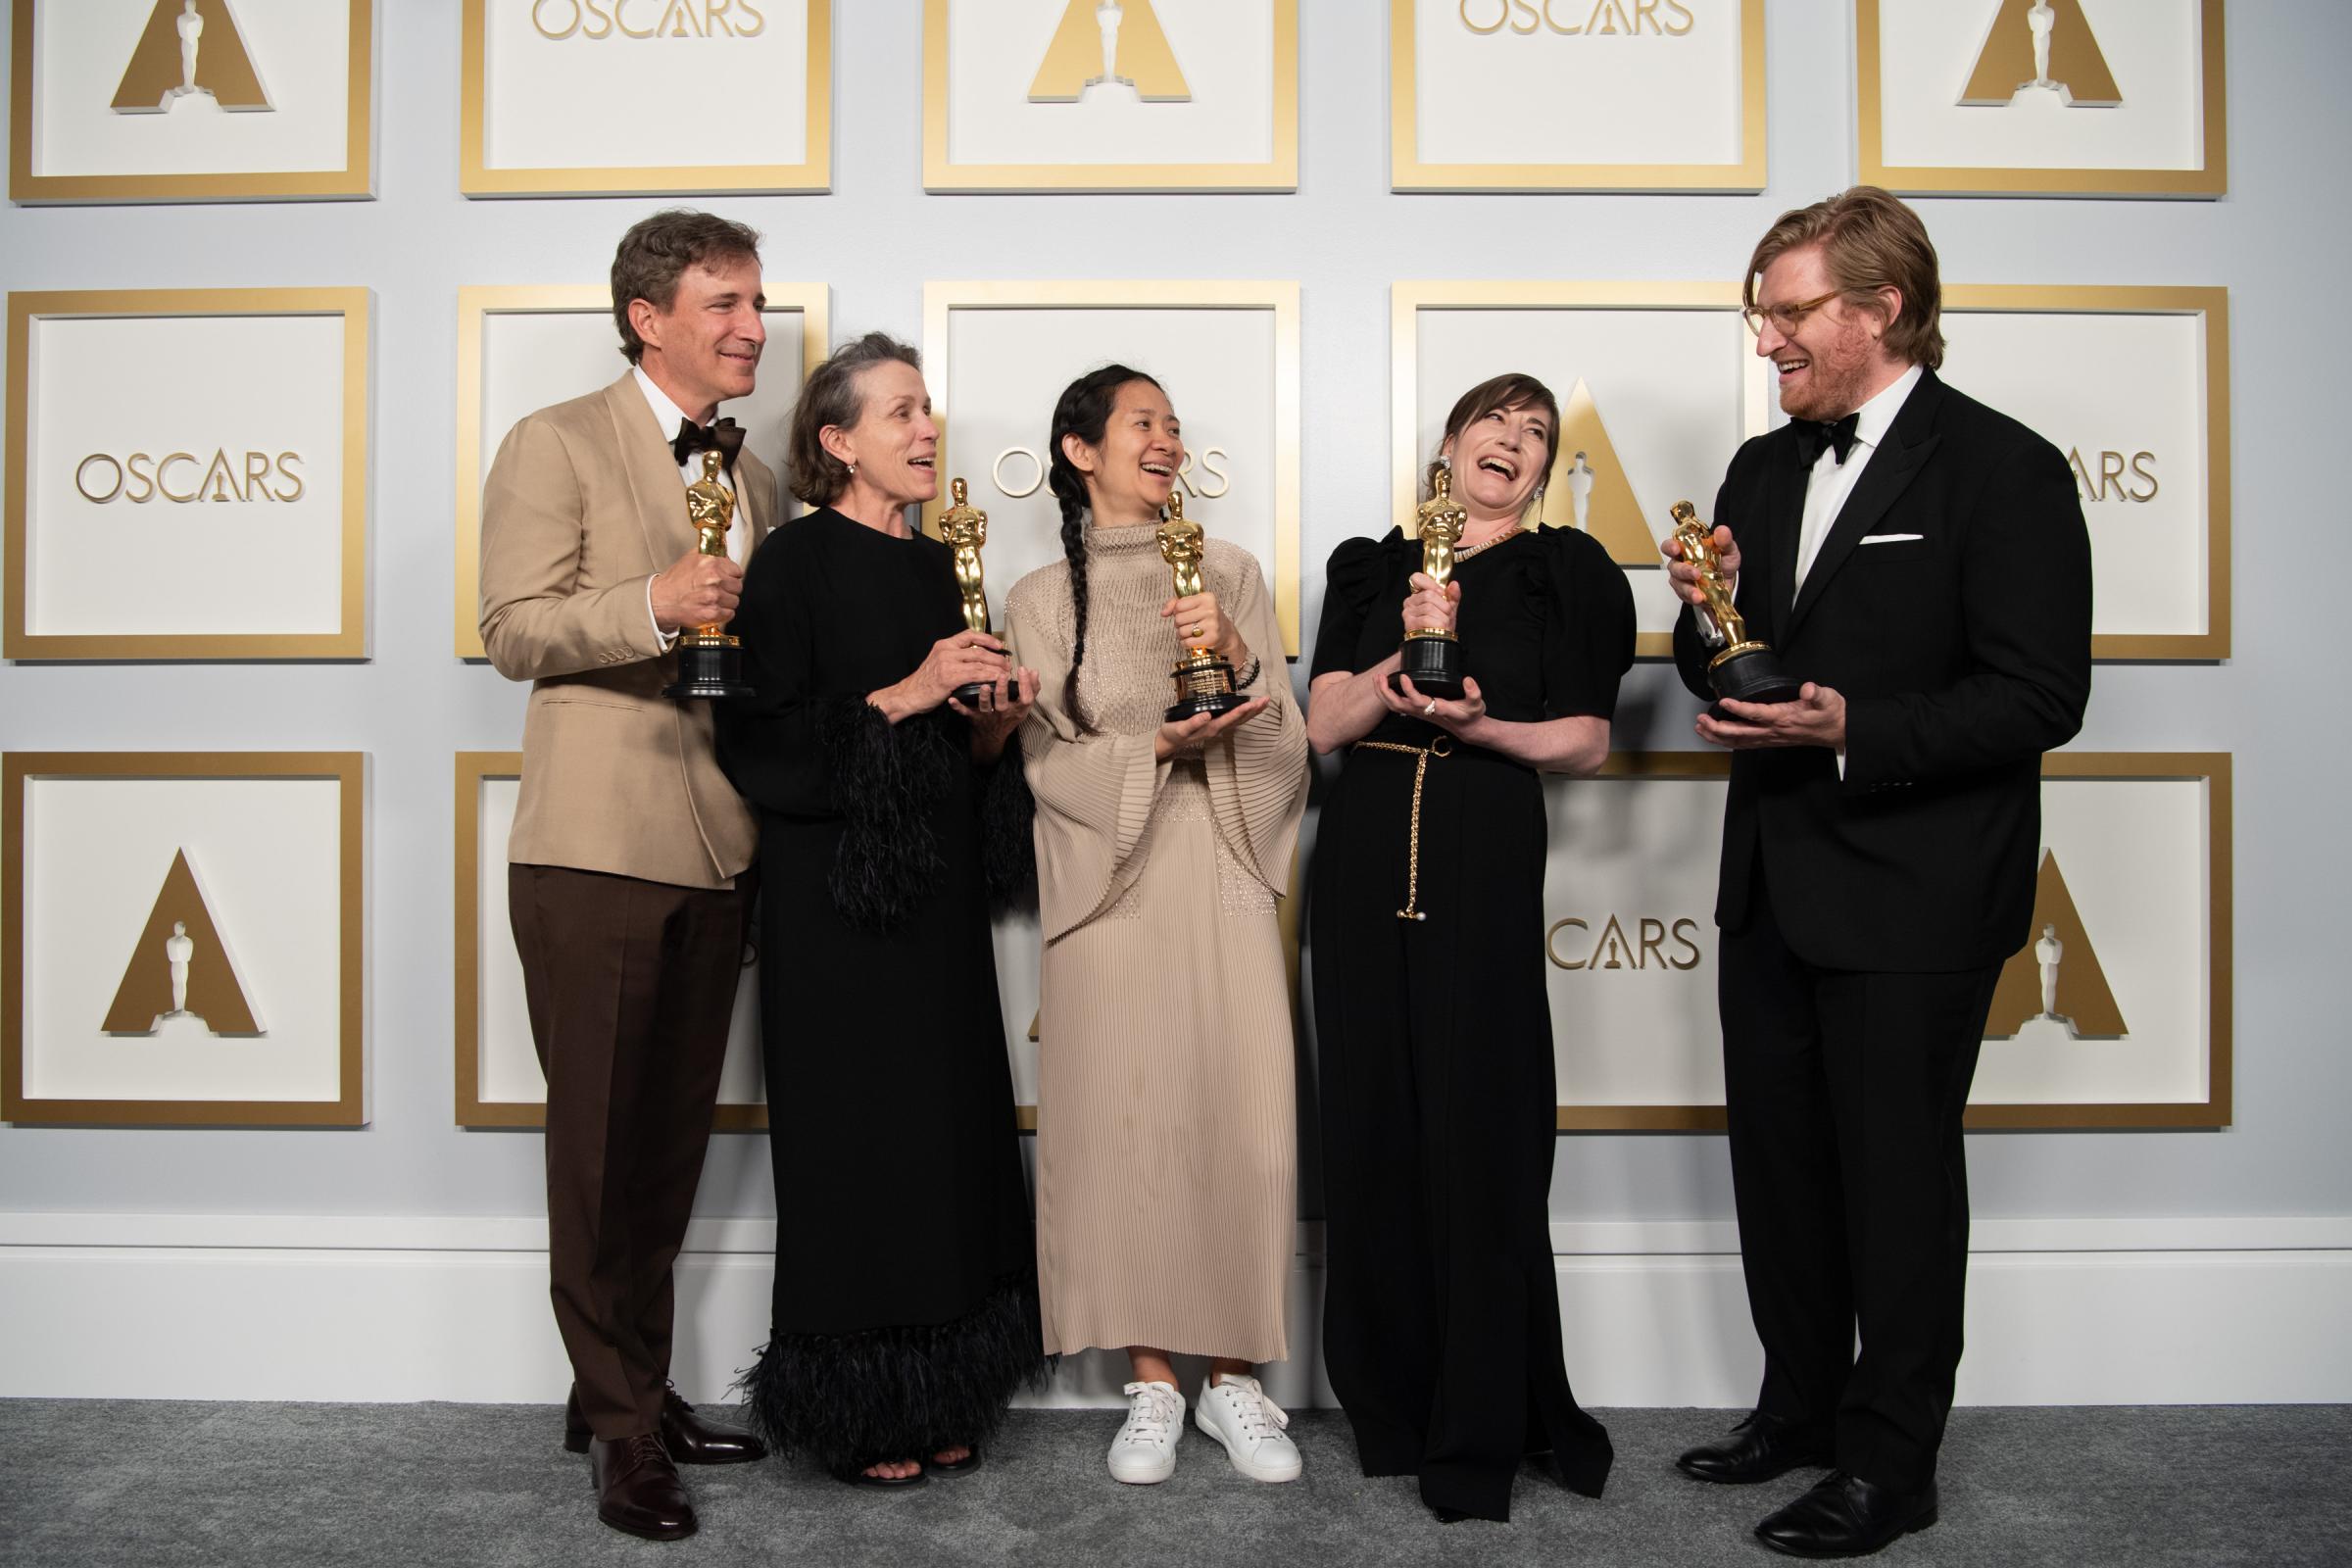 Peter Spears, Frances McDormand, Chloe Zhao, Mollye Asher, and Dan Janvey, holding their Oscar statues after winning best picture for the film Nomadland